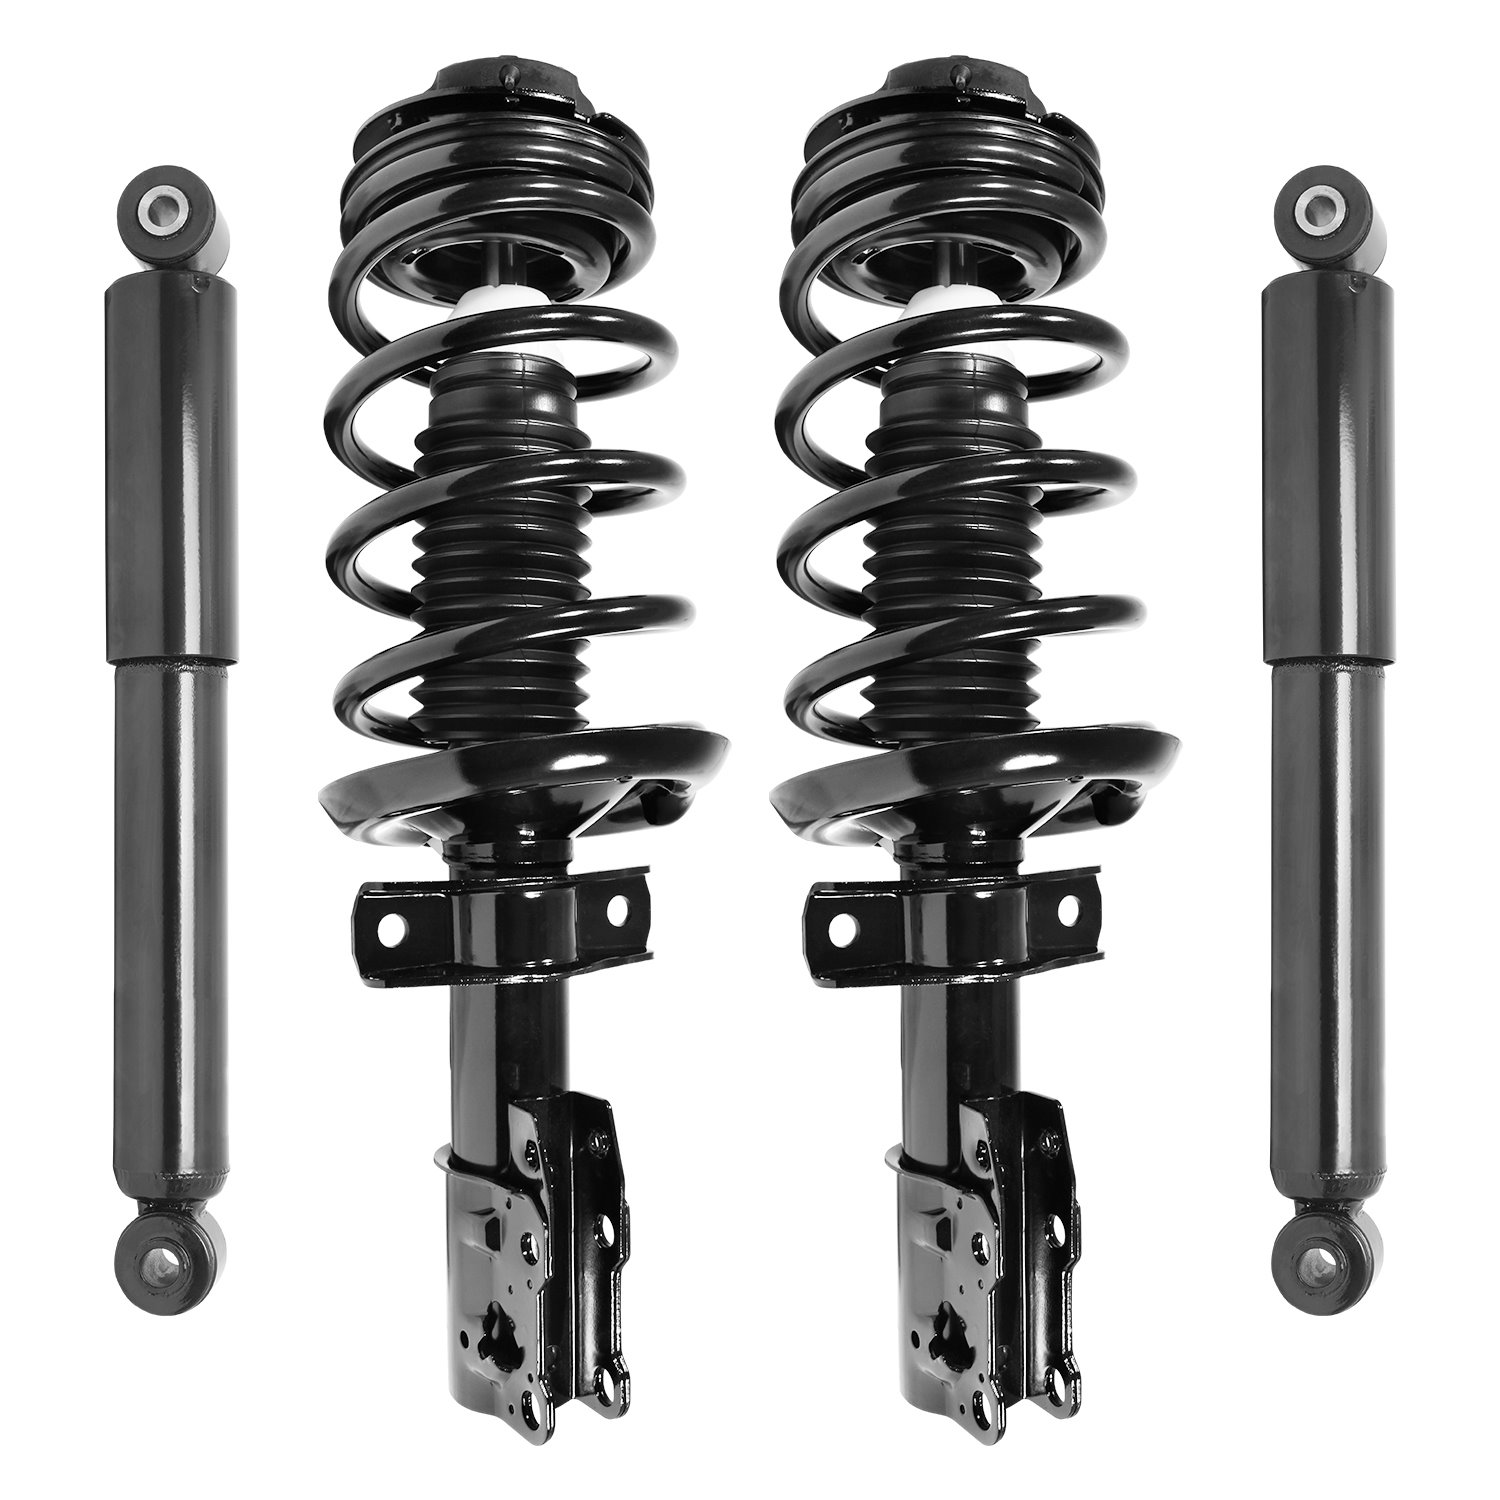 4-11270-259600-001 Front & Rear Suspension Strut & Coil Spring Assembly Fits Select Saturn Ion